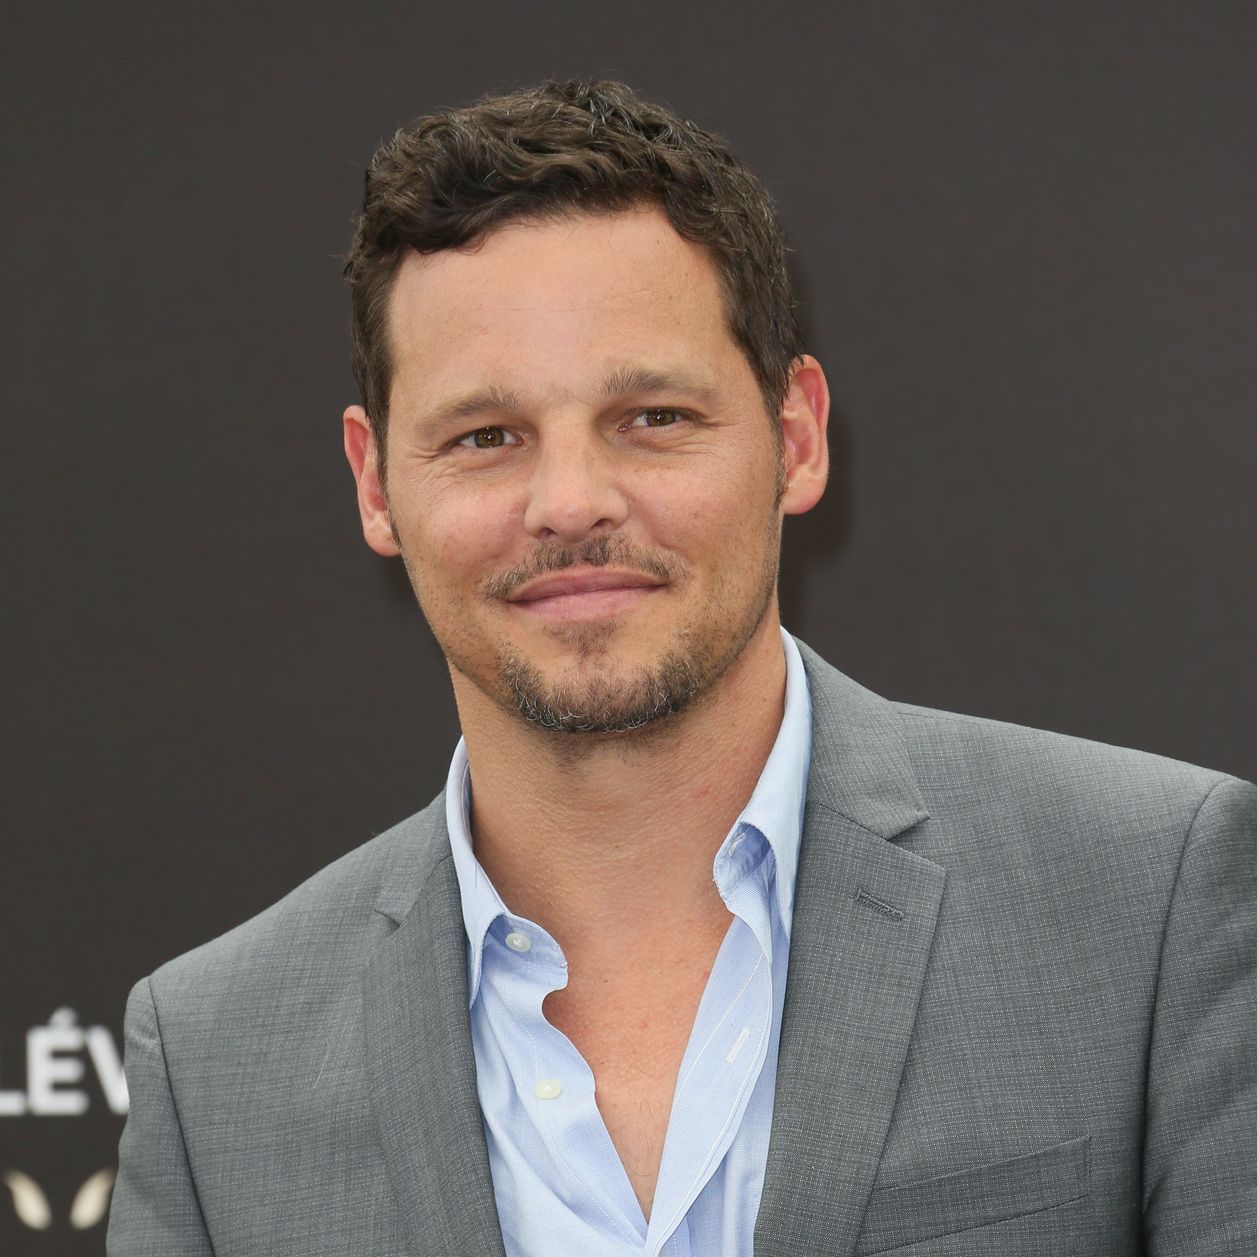 Tristesse ! Justin Chambers quitte la série Grey's Anatomy